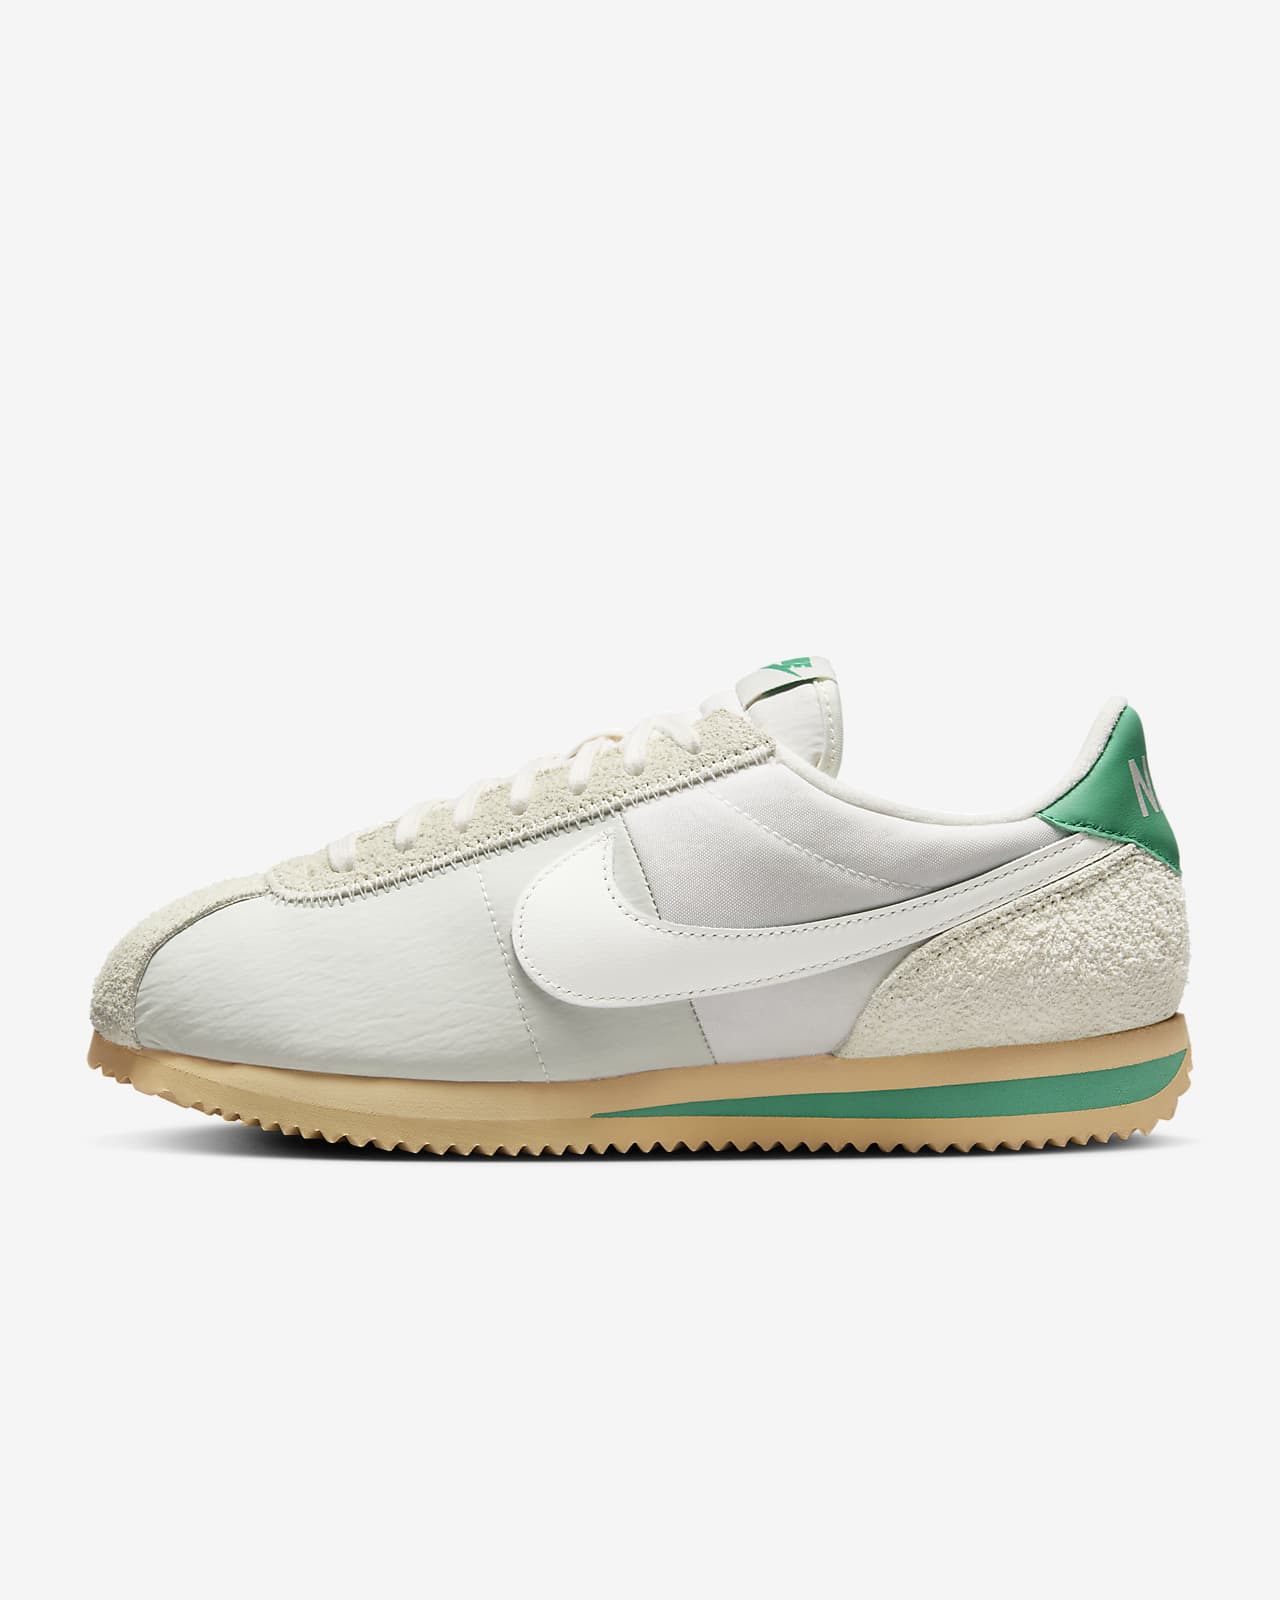 Nike Cortez review: Are the iconic sneakers worth buying? - Reviewed